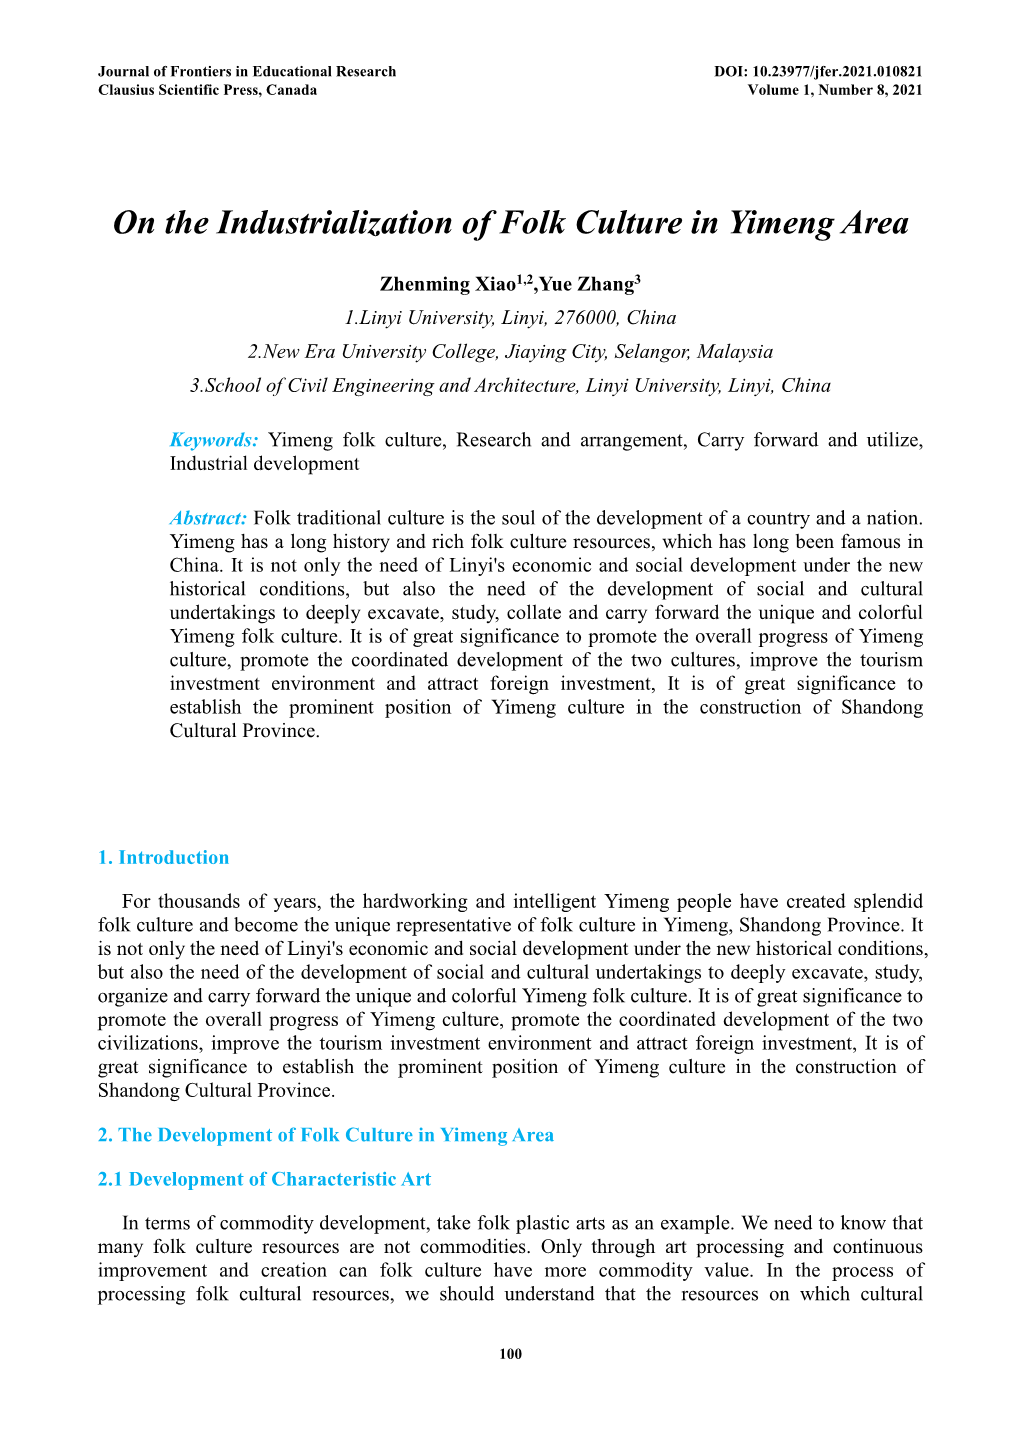 On the Industrialization of Folk Culture in Yimeng Area